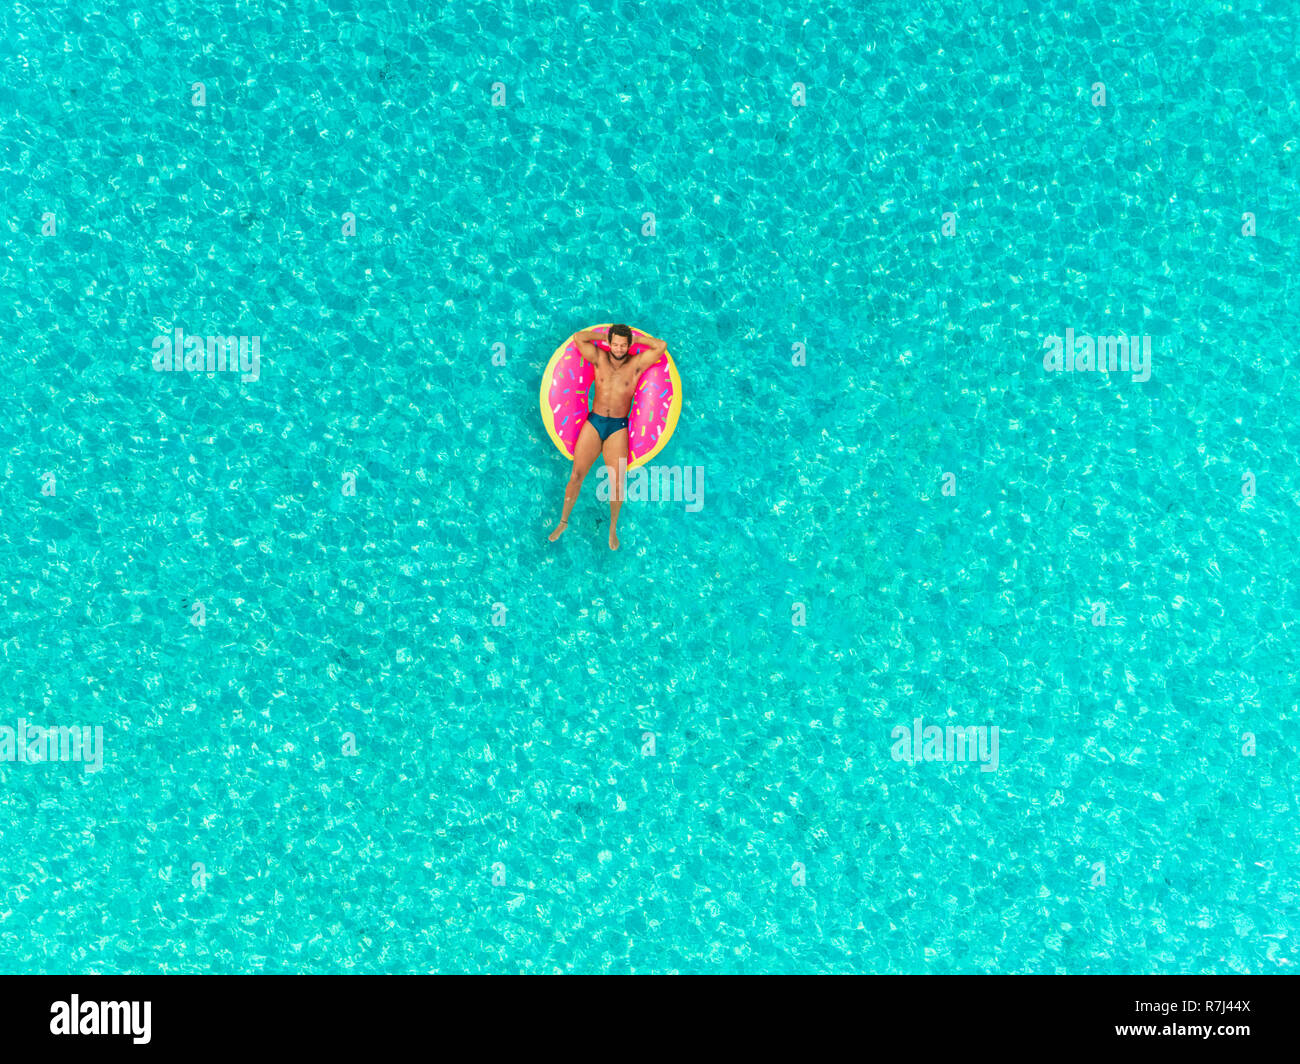 Aerial view of man floating on inflatable donut mattress, relaxing. Stock Photo